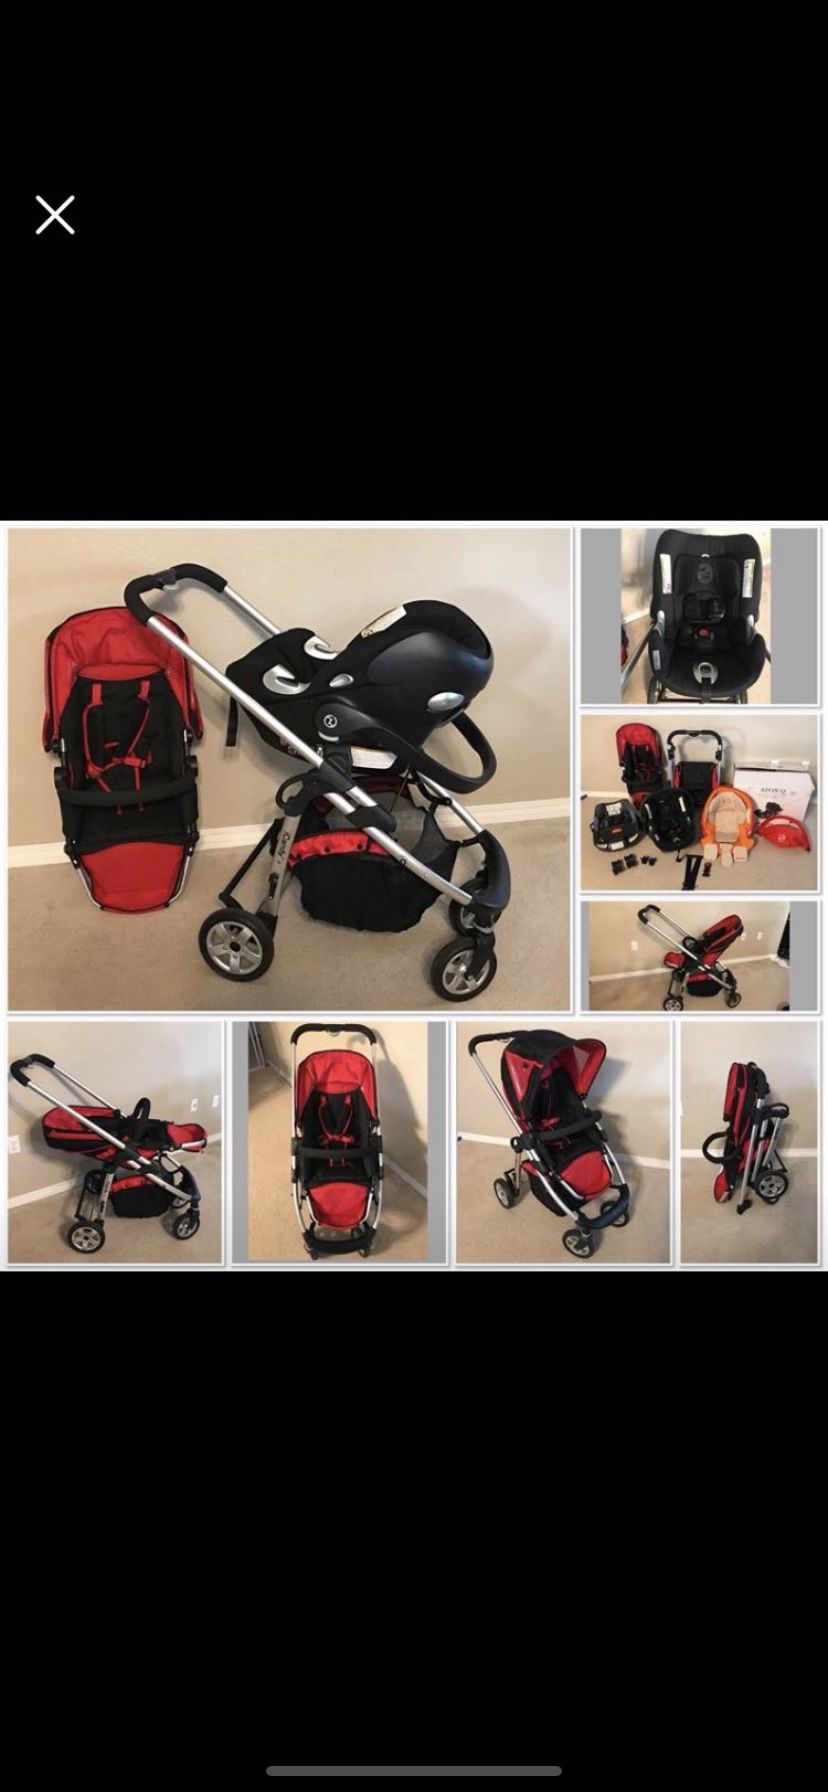 Stroller iCandy cherry and car seat Cybex Aton Q